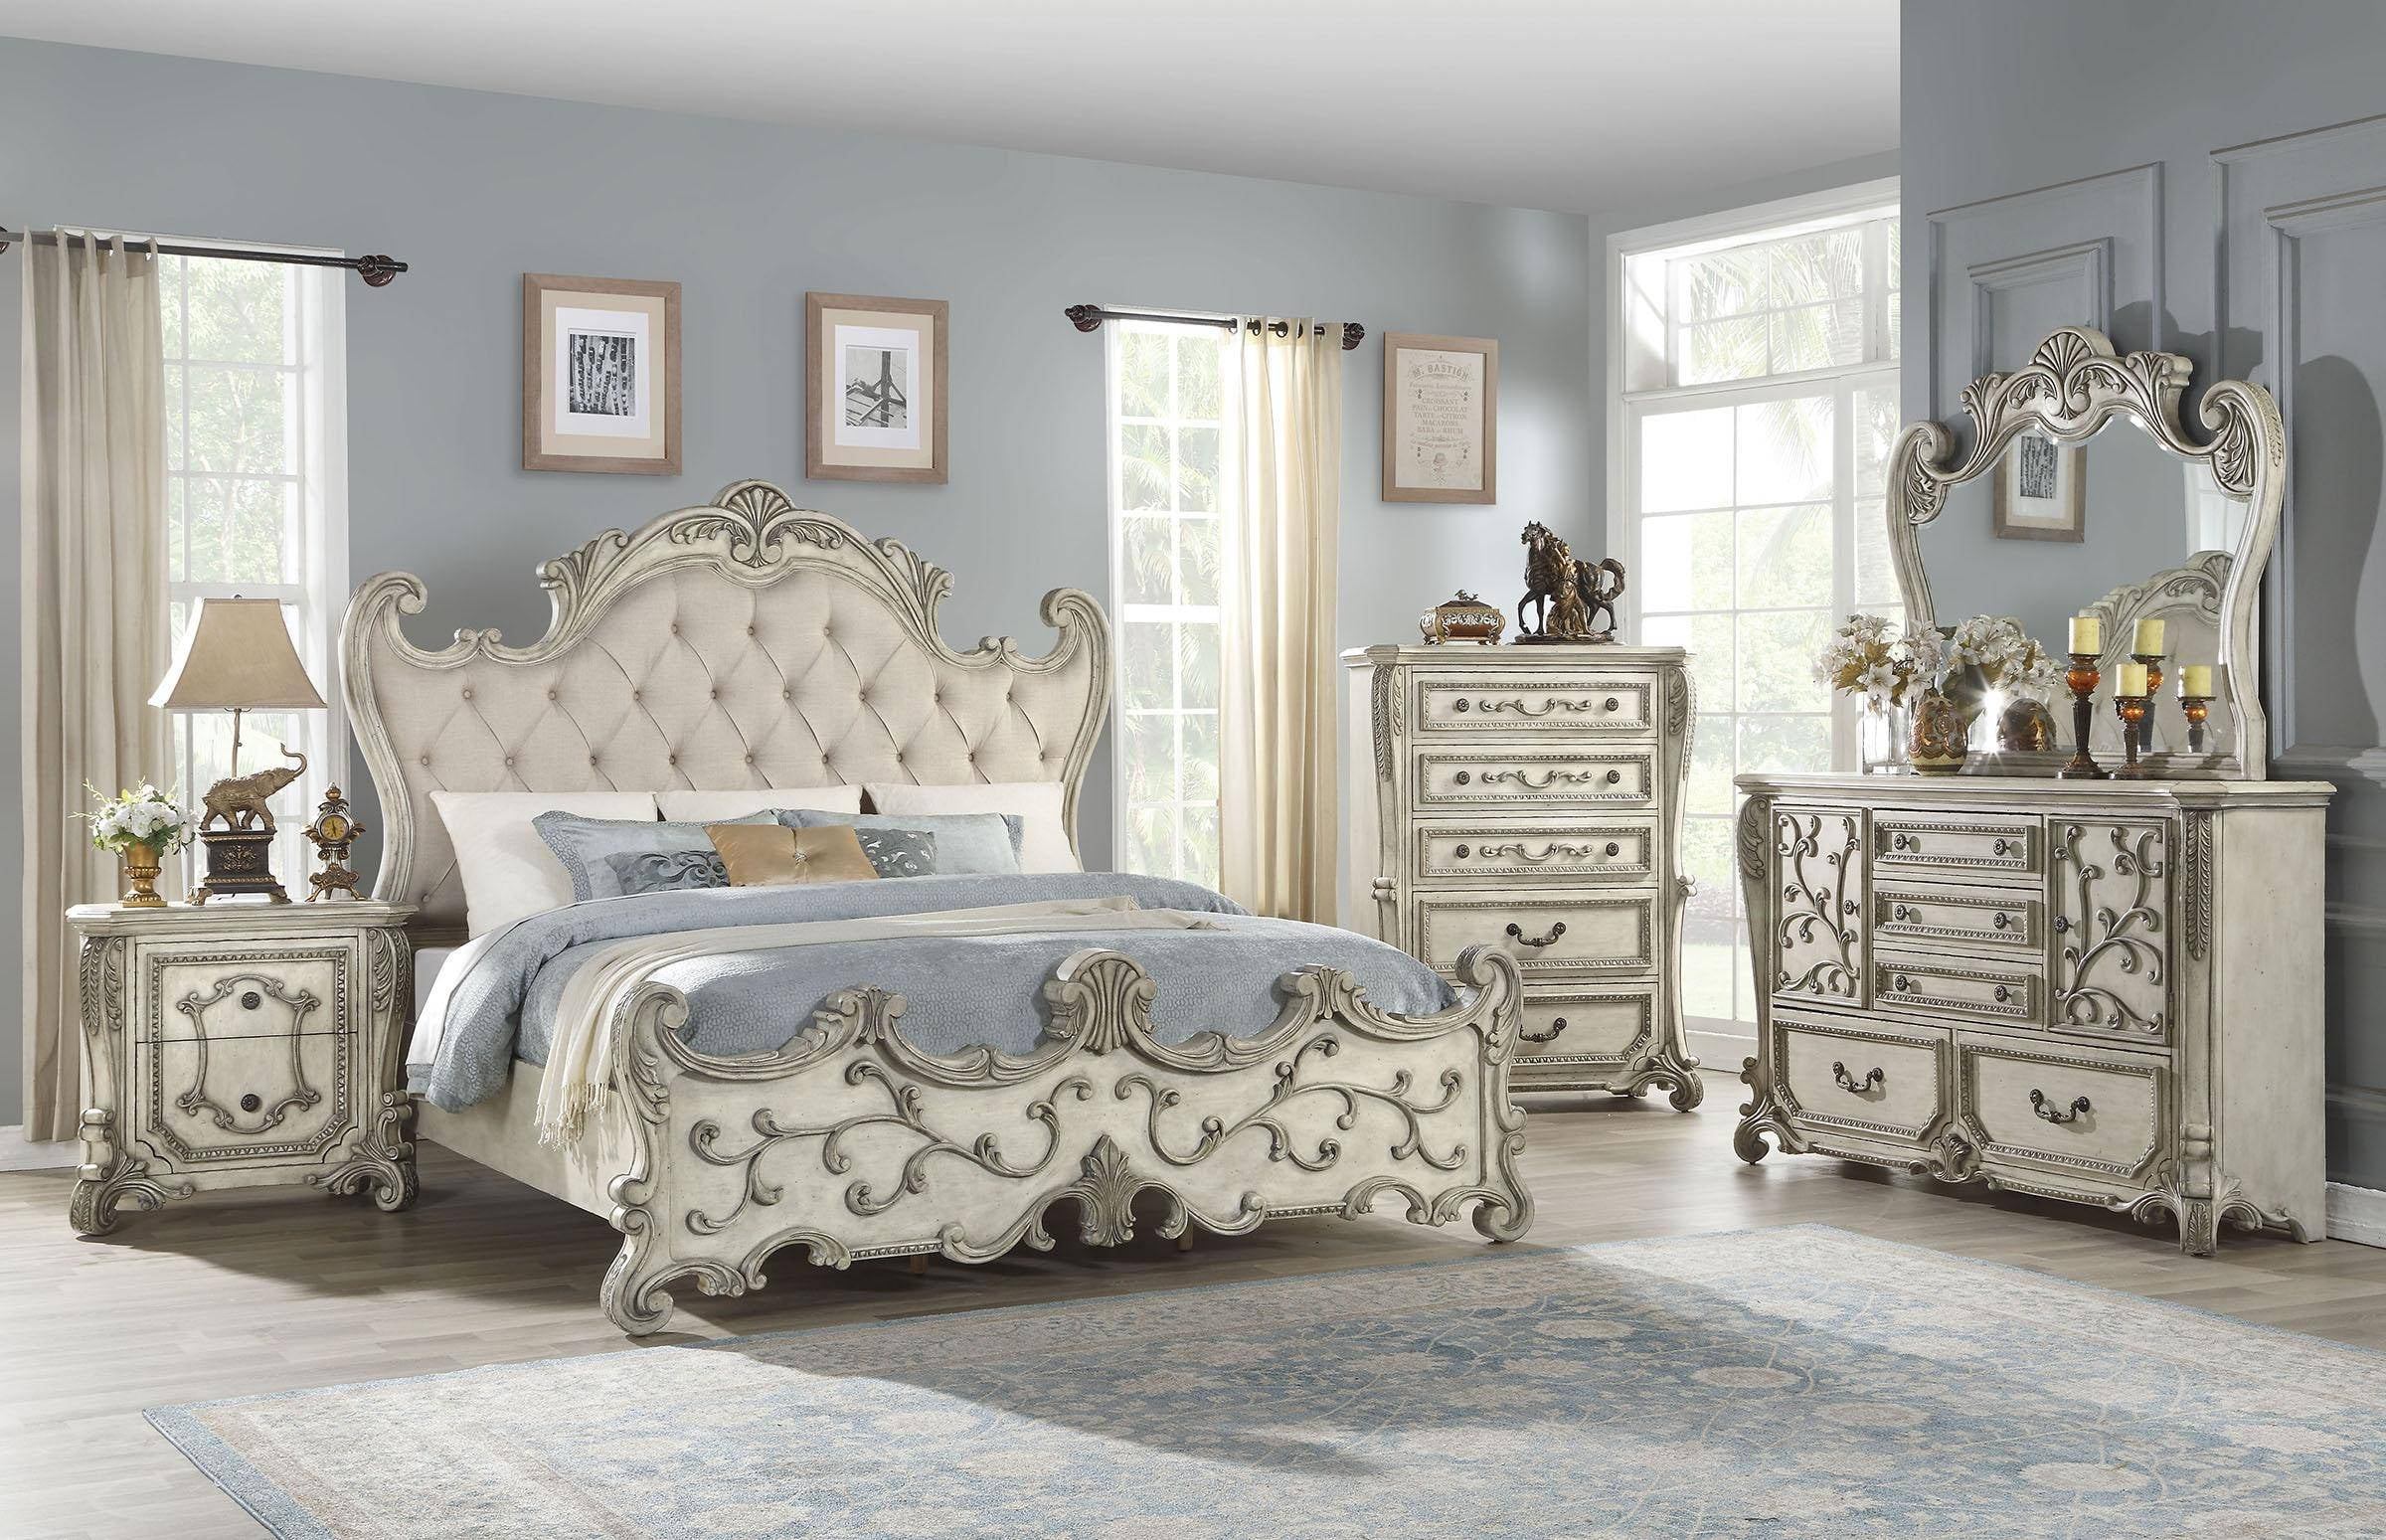 antique white and grey bedroom furniture finish